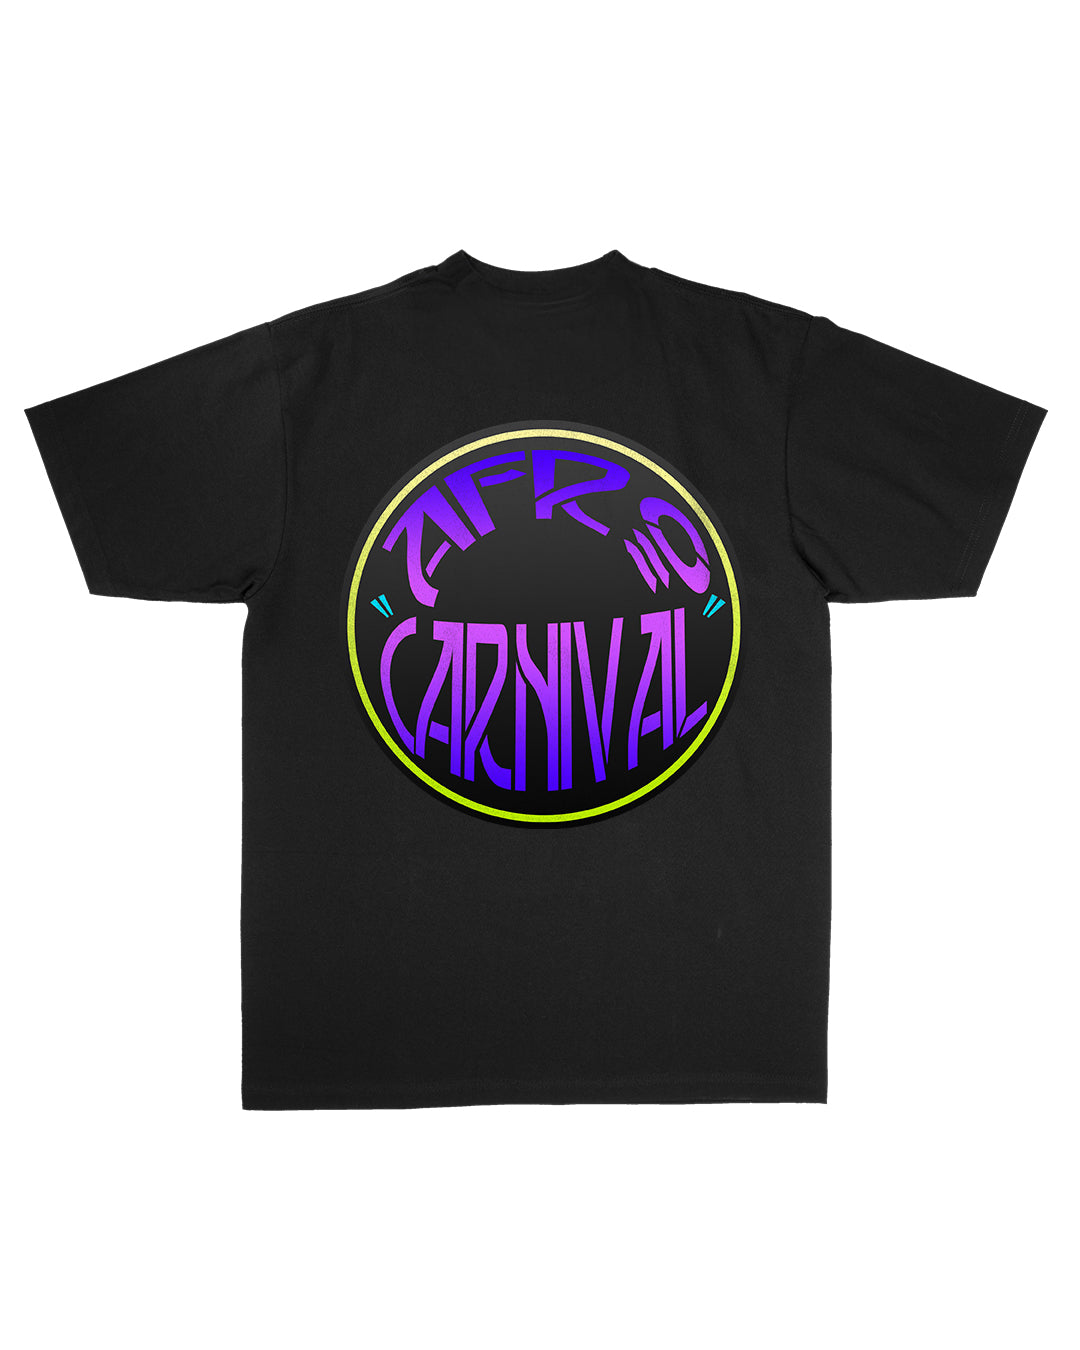 AFRO CARNIVAL T-SHIRT — black and purple